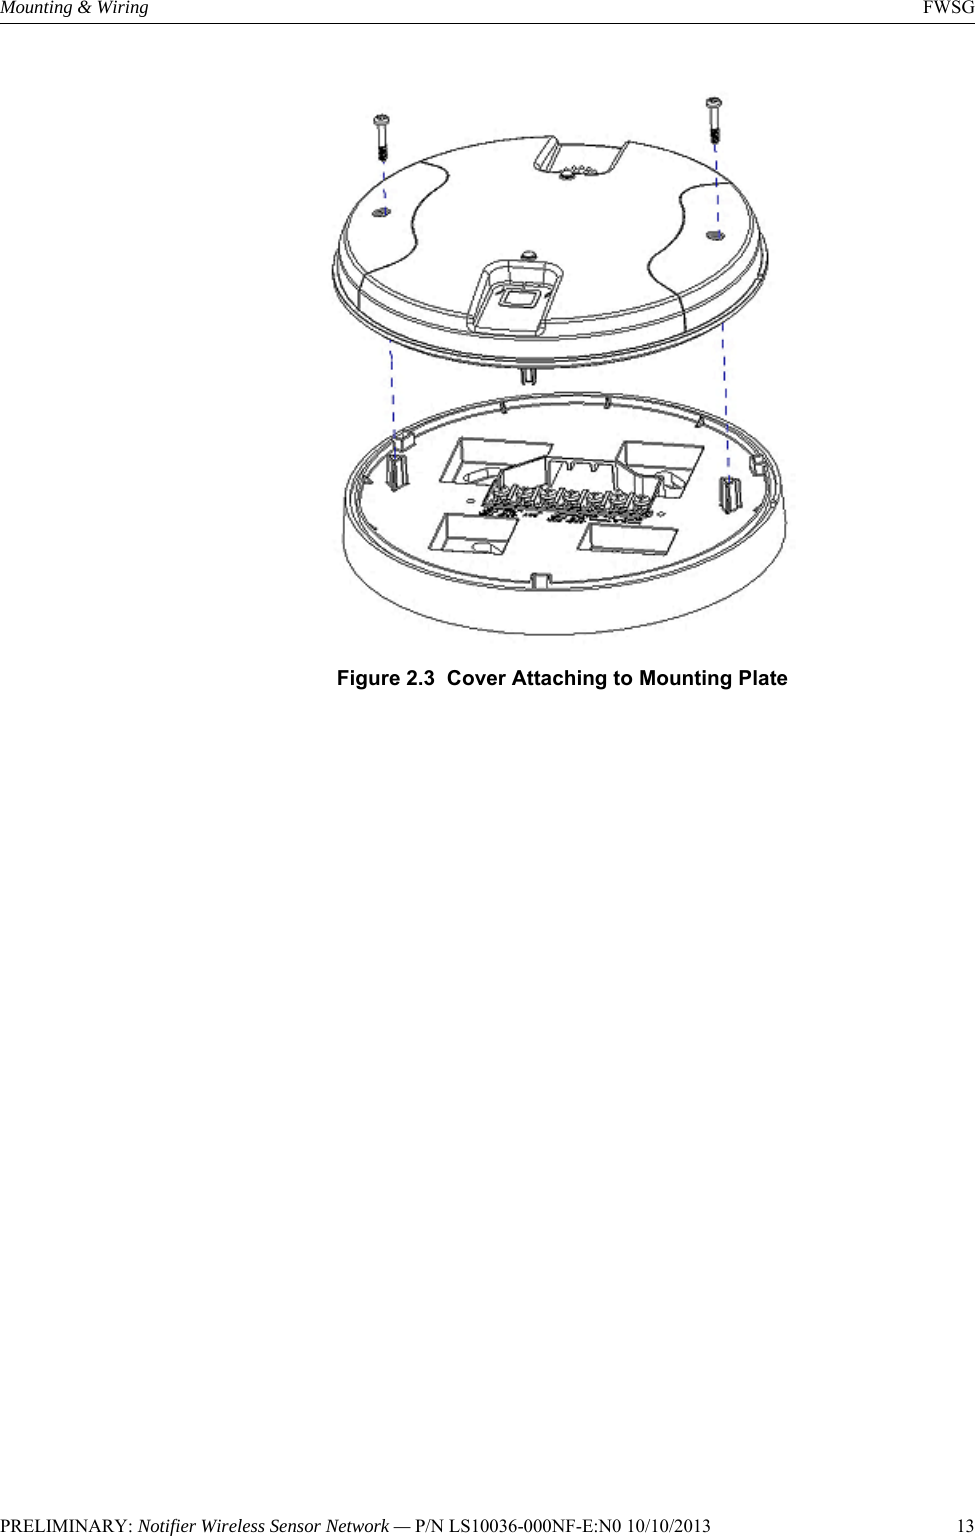 PRELIMINARY: Notifier Wireless Sensor Network — P/N LS10036-000NF-E:N0 10/10/2013   13Mounting &amp; Wiring FWSGFigure 2.3  Cover Attaching to Mounting Plate